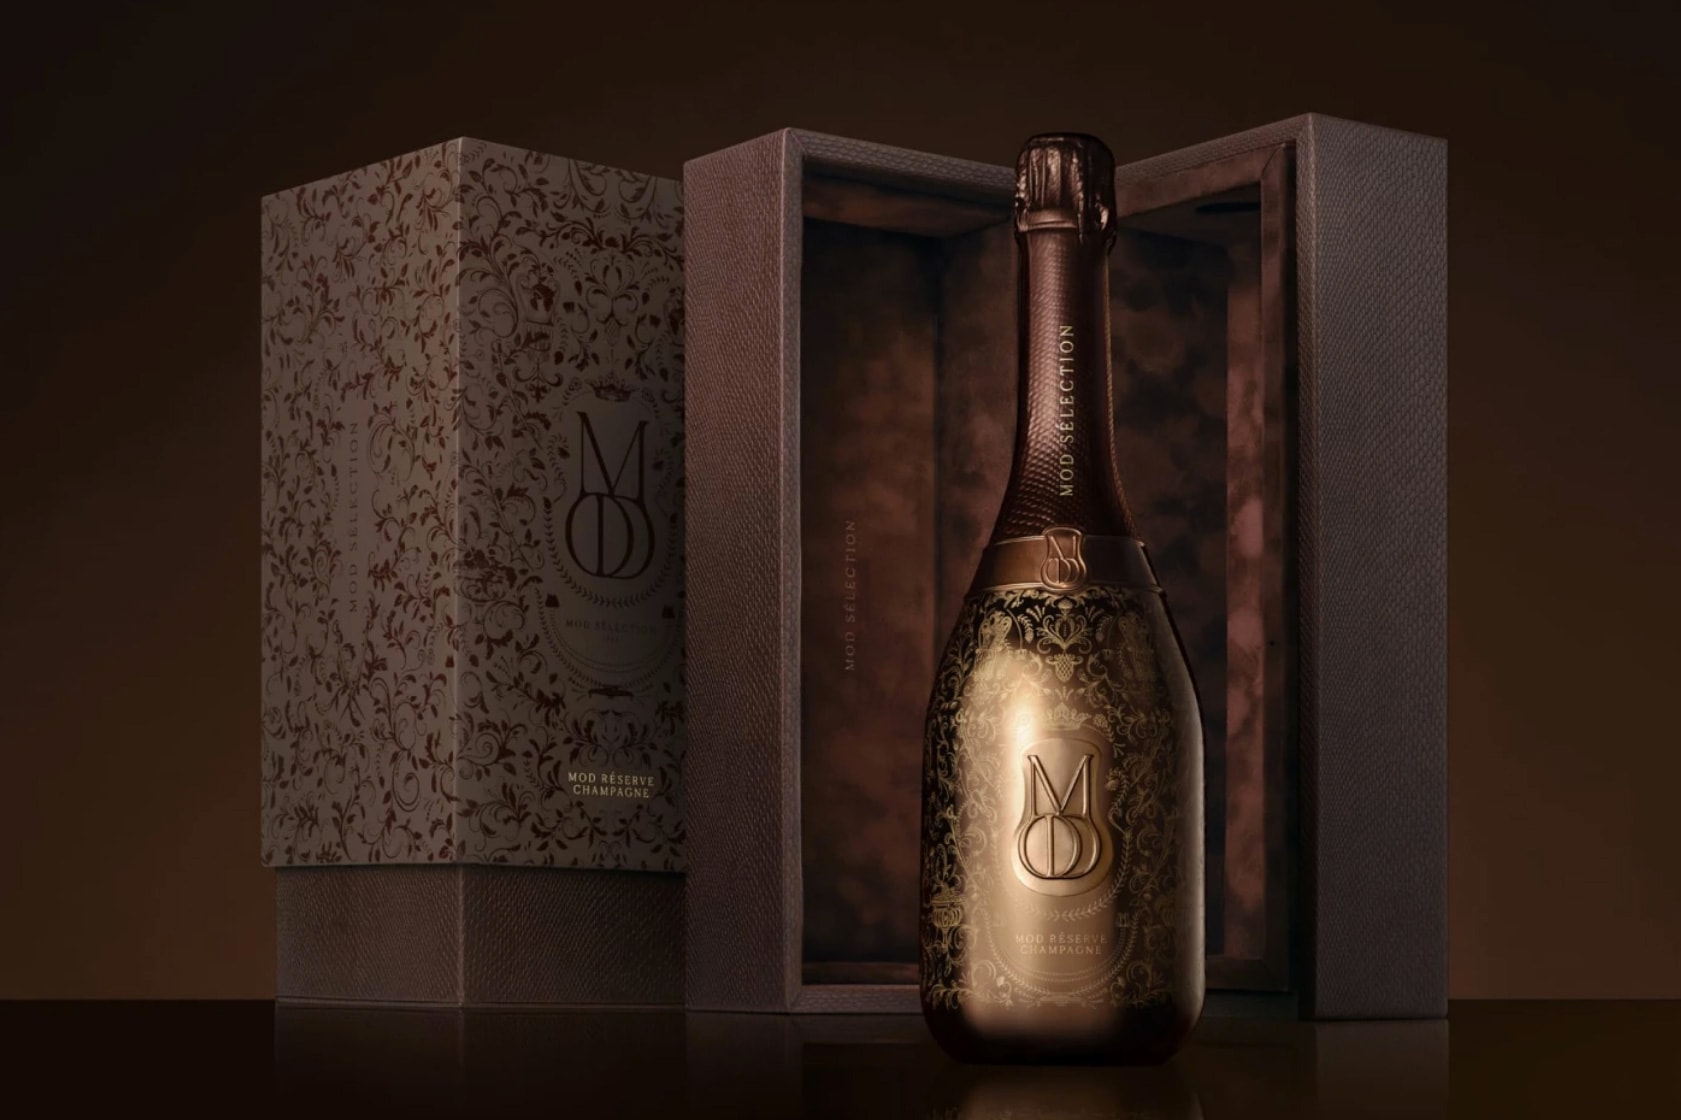 Drake Launches Mod Sélection Champagne Line drizzy Virginia Black Whiskey alcohol  